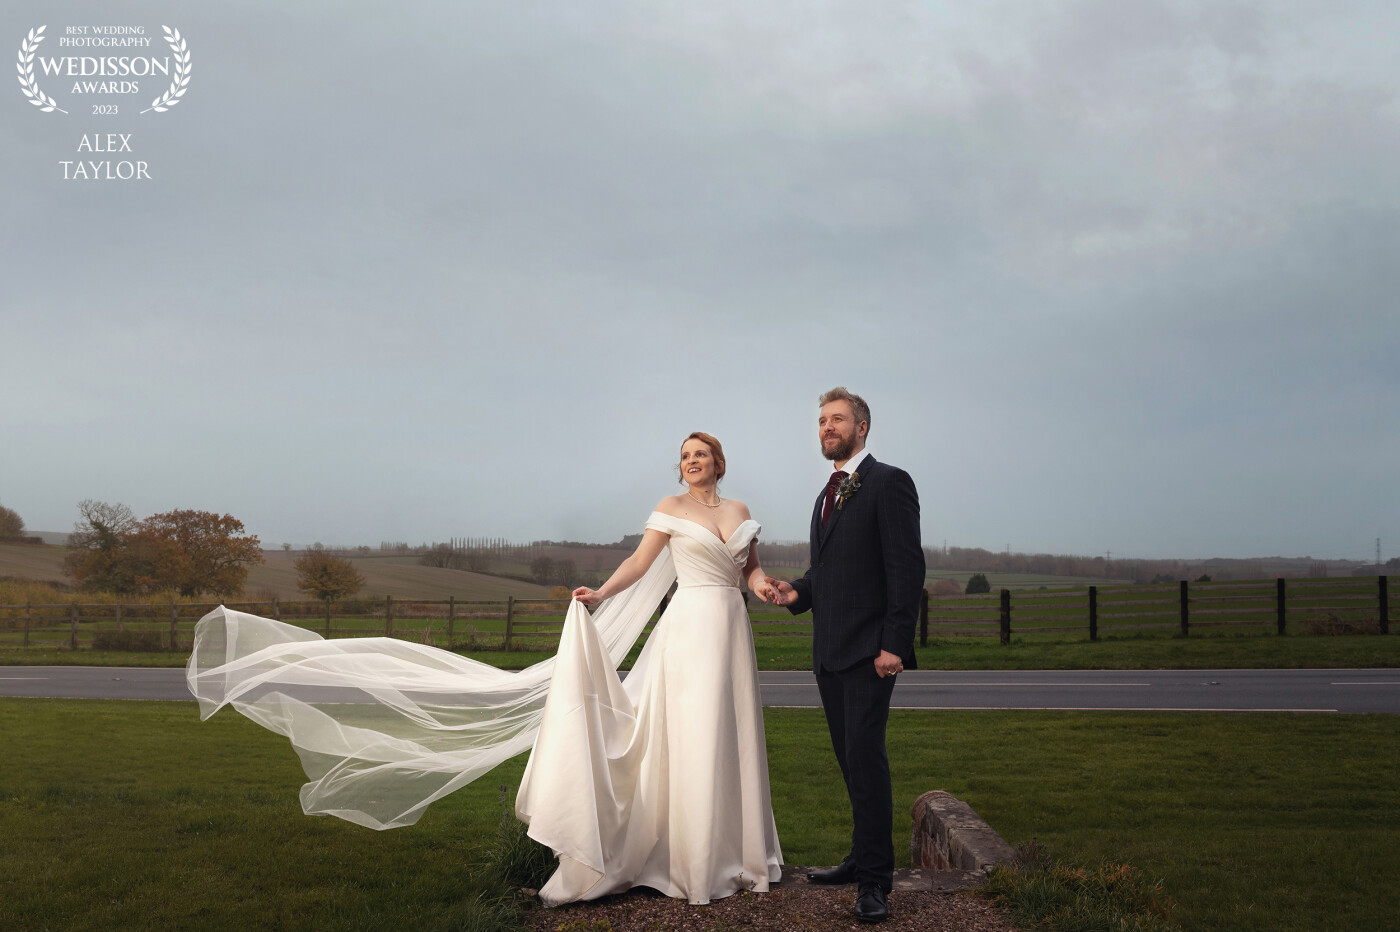 It was starting to get dark at Elizabeth and Chris’ winter wedding at the stunning Donington Park Farmhouse. I lit the couple with flash to highlight them against the rolling Derbyshire scenery.